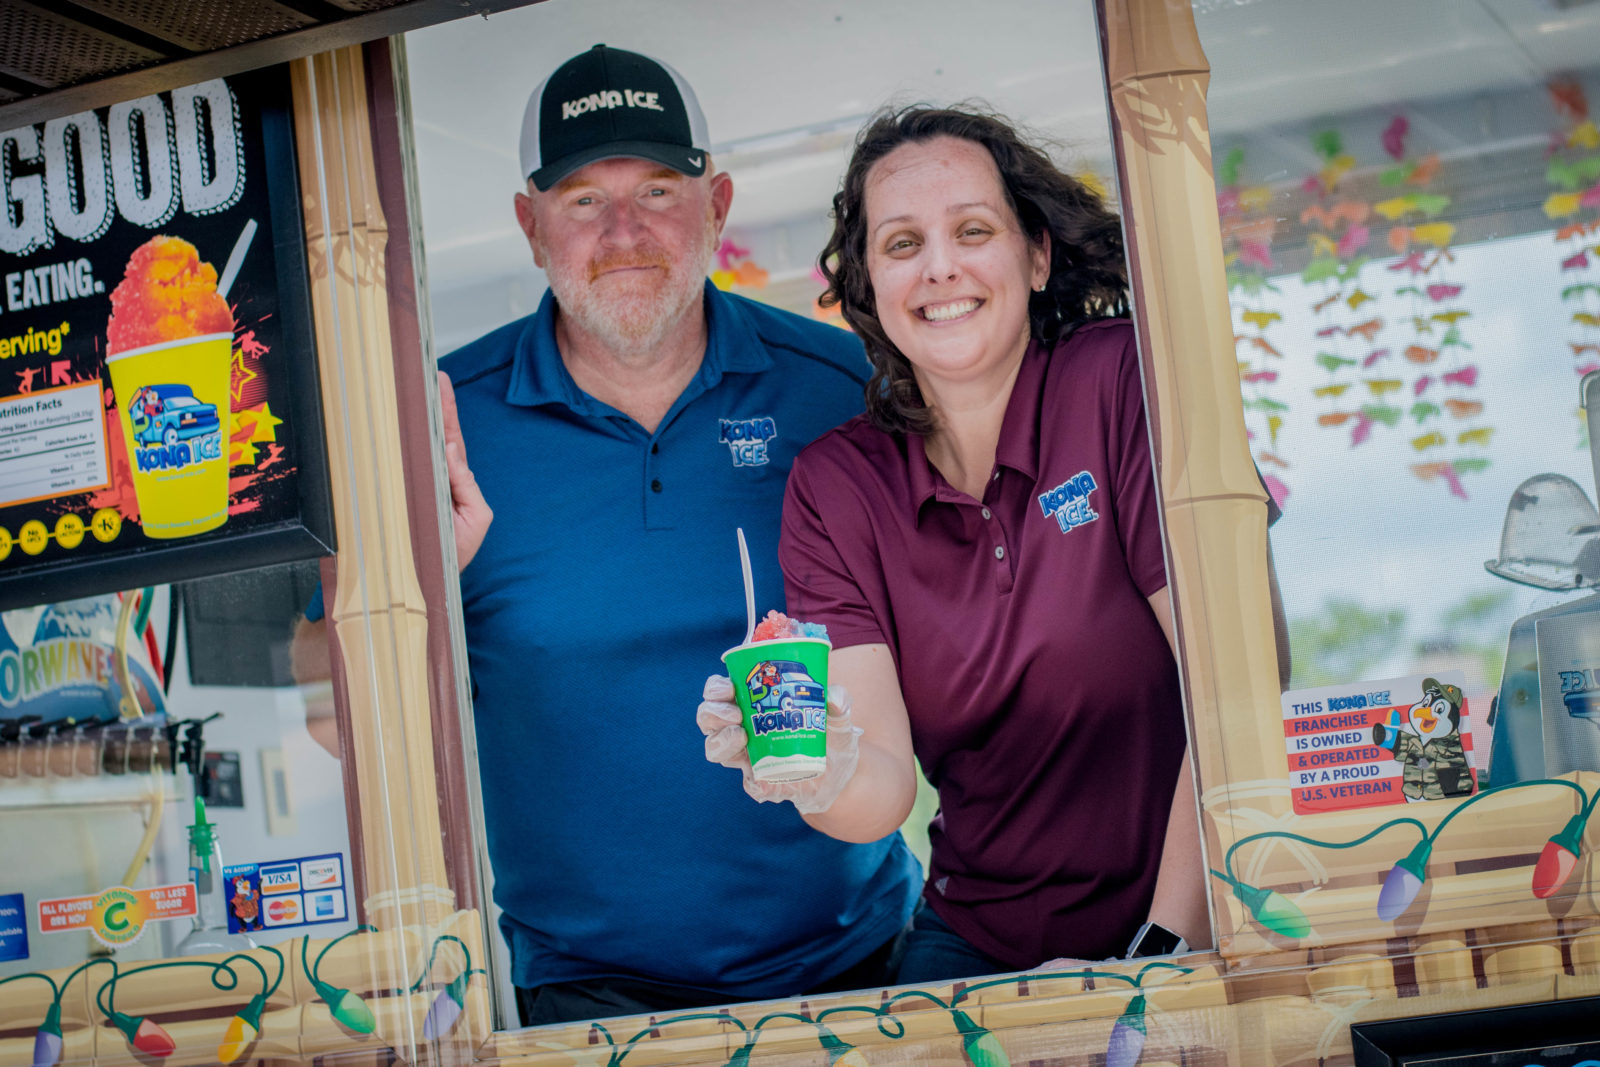 Slagle and Minton pictured in the window of the Kona Ice truck.